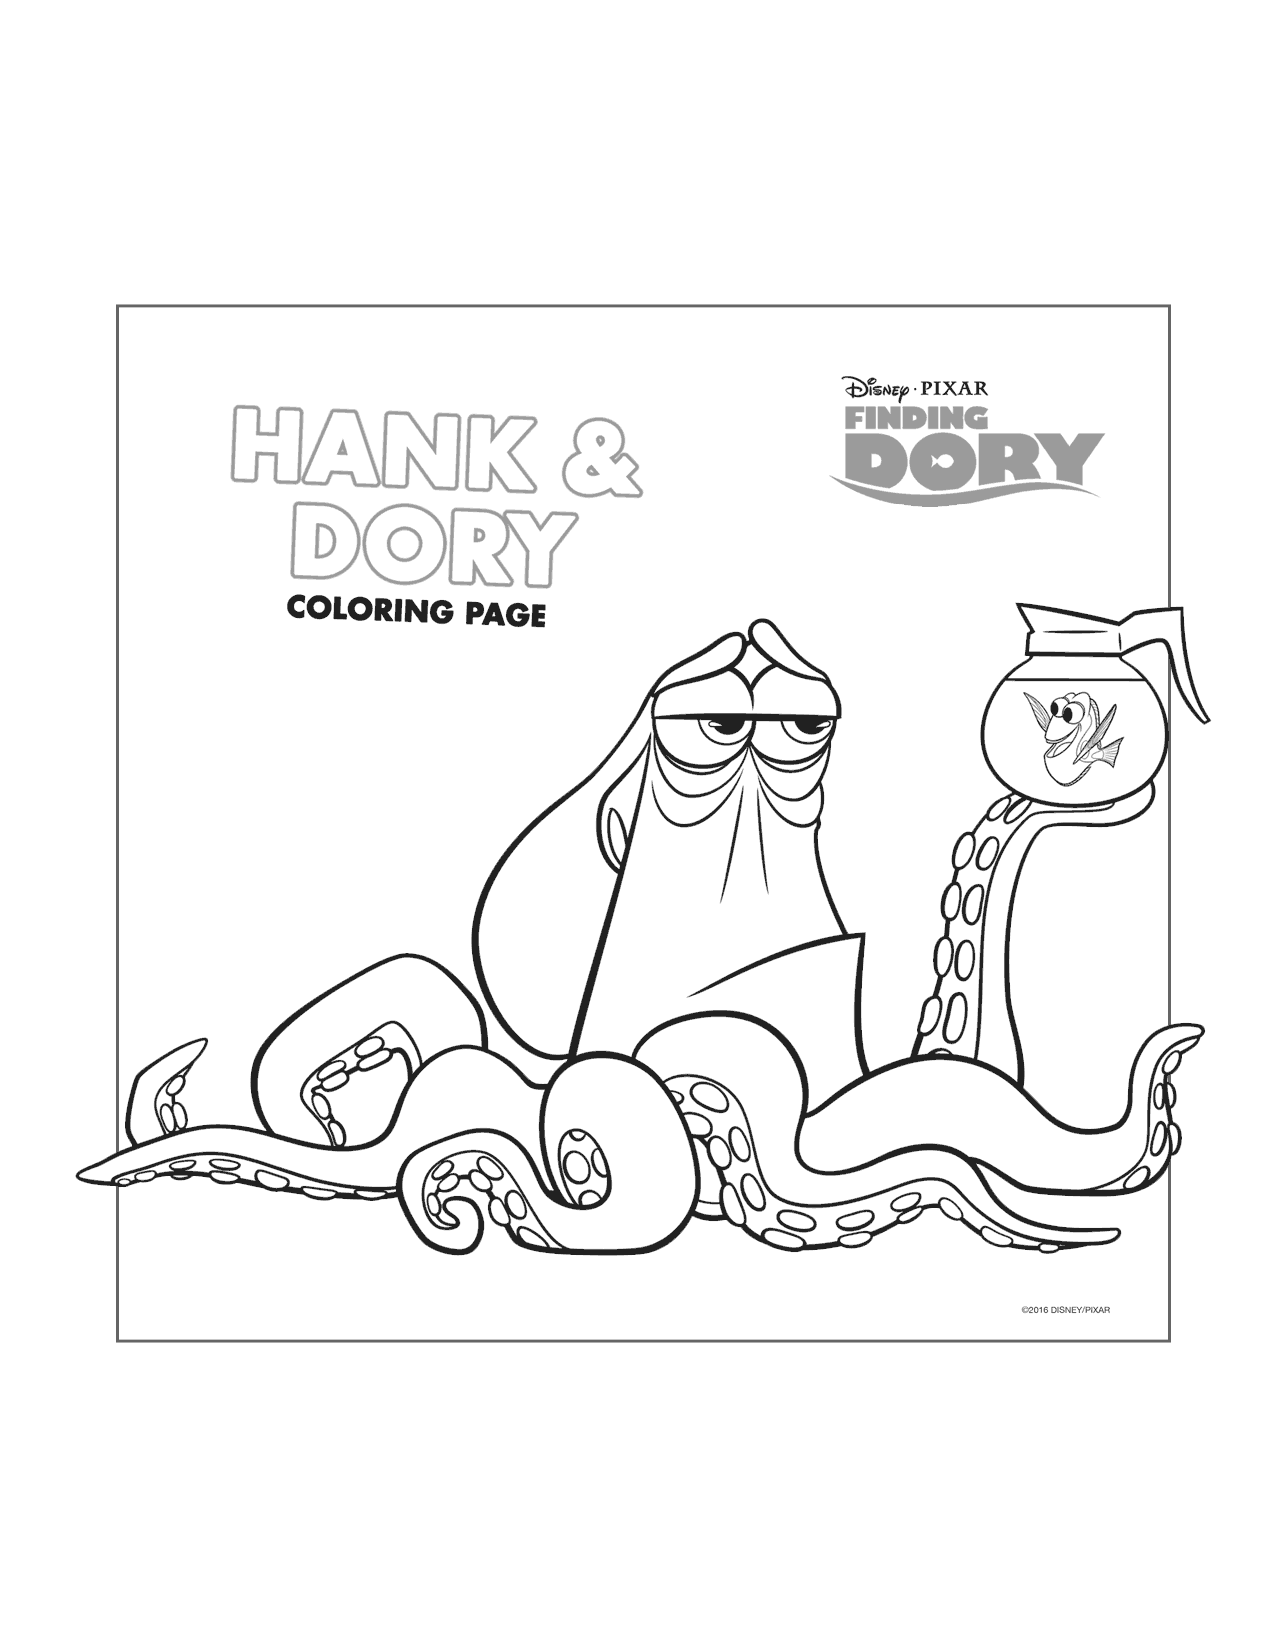 Hank Helps Dory Coloring Page